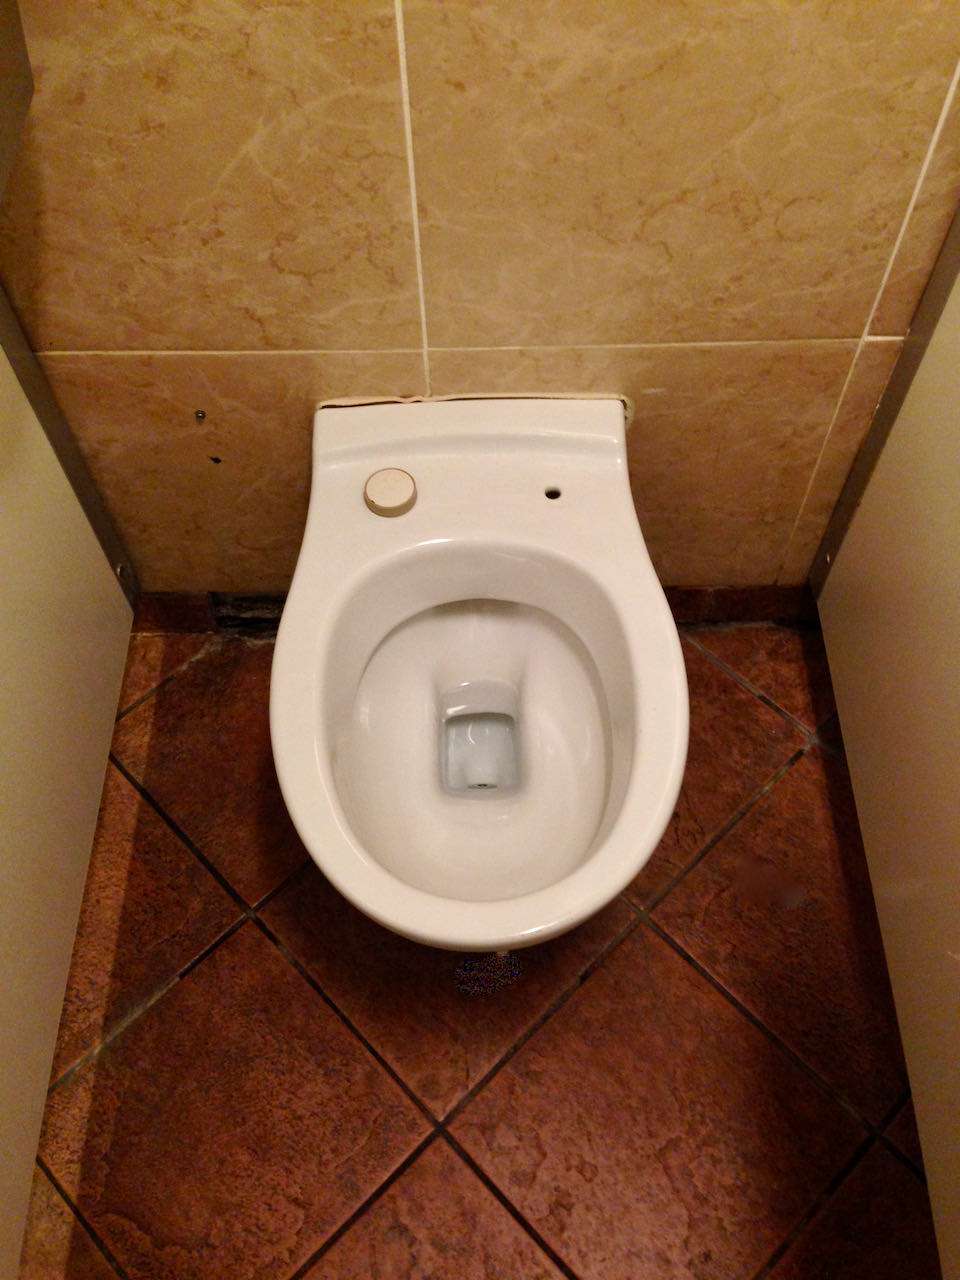 Culture shock in Italy missing toilet seats